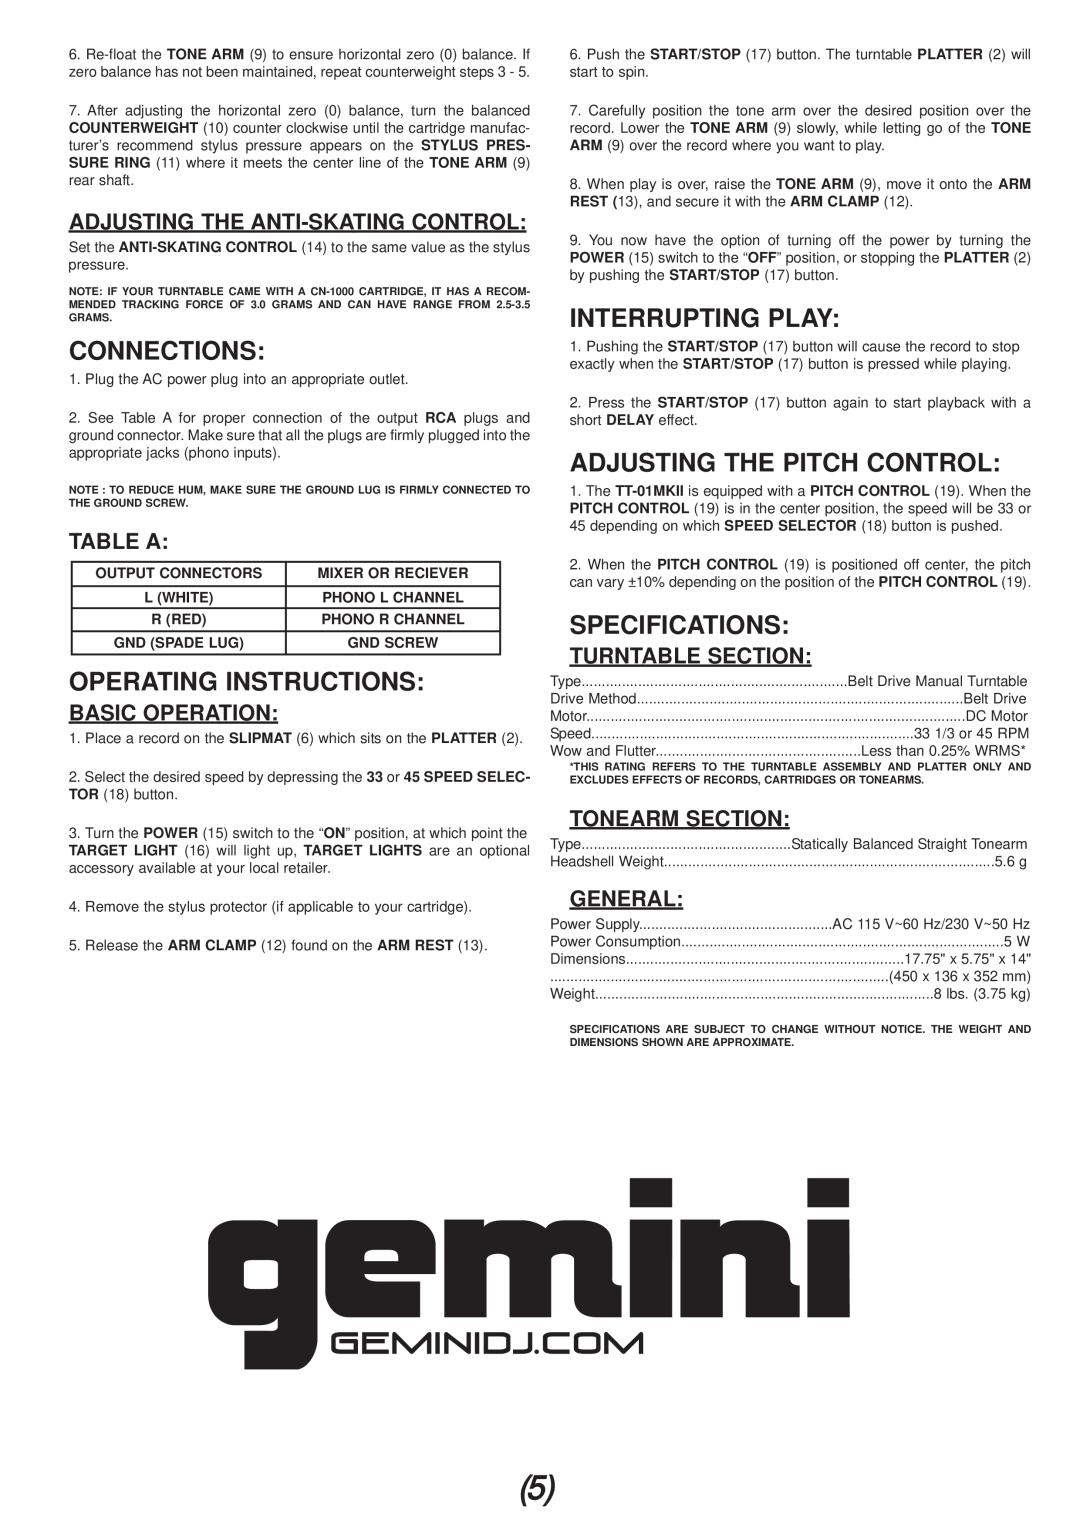 Gemini TT-01mkii manual Connections, Operating Instructions, Interrupting Play, Adjusting The Pitch Control, Specifications 